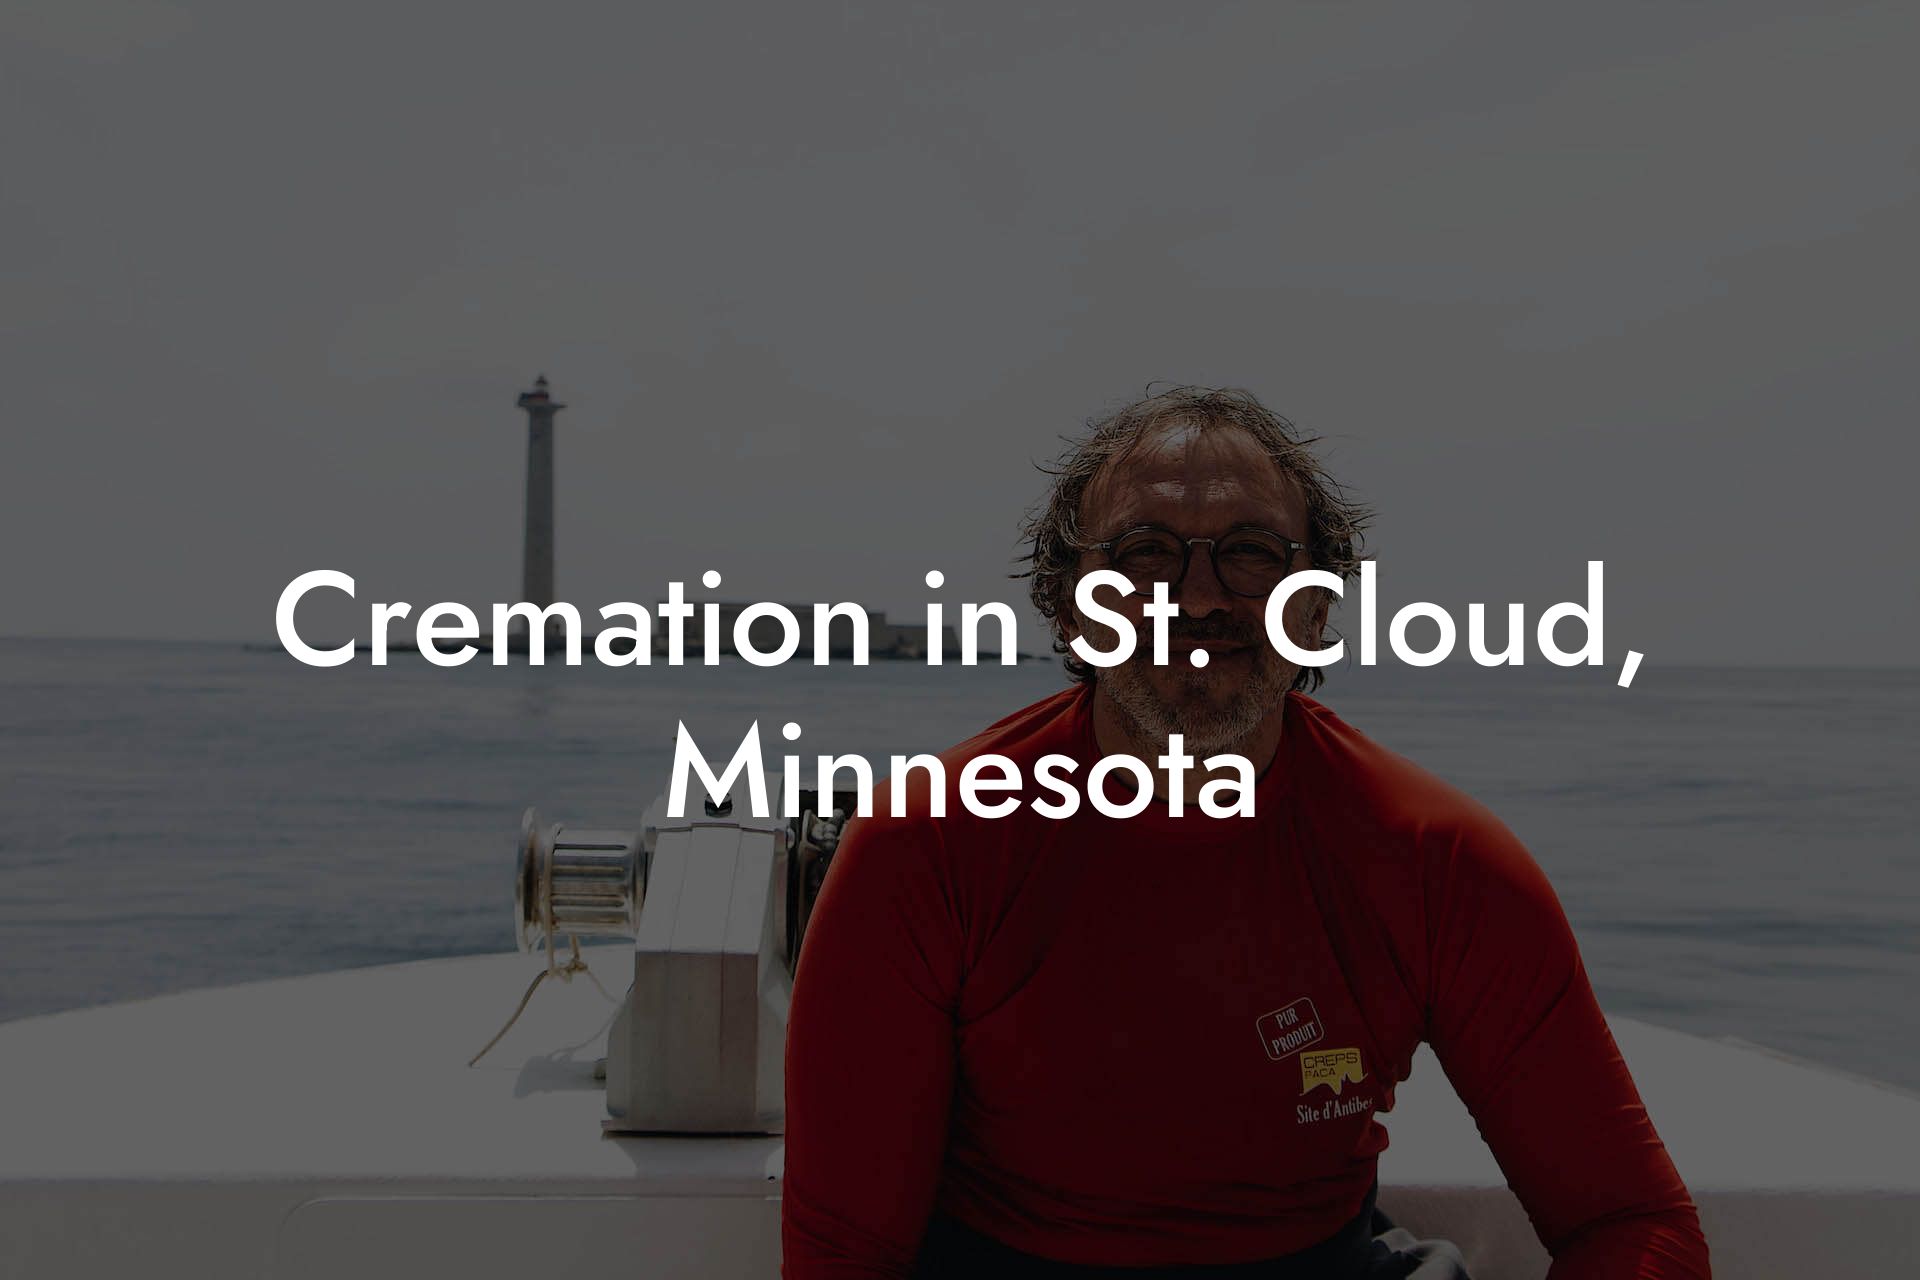 Cremation in St. Cloud, Minnesota